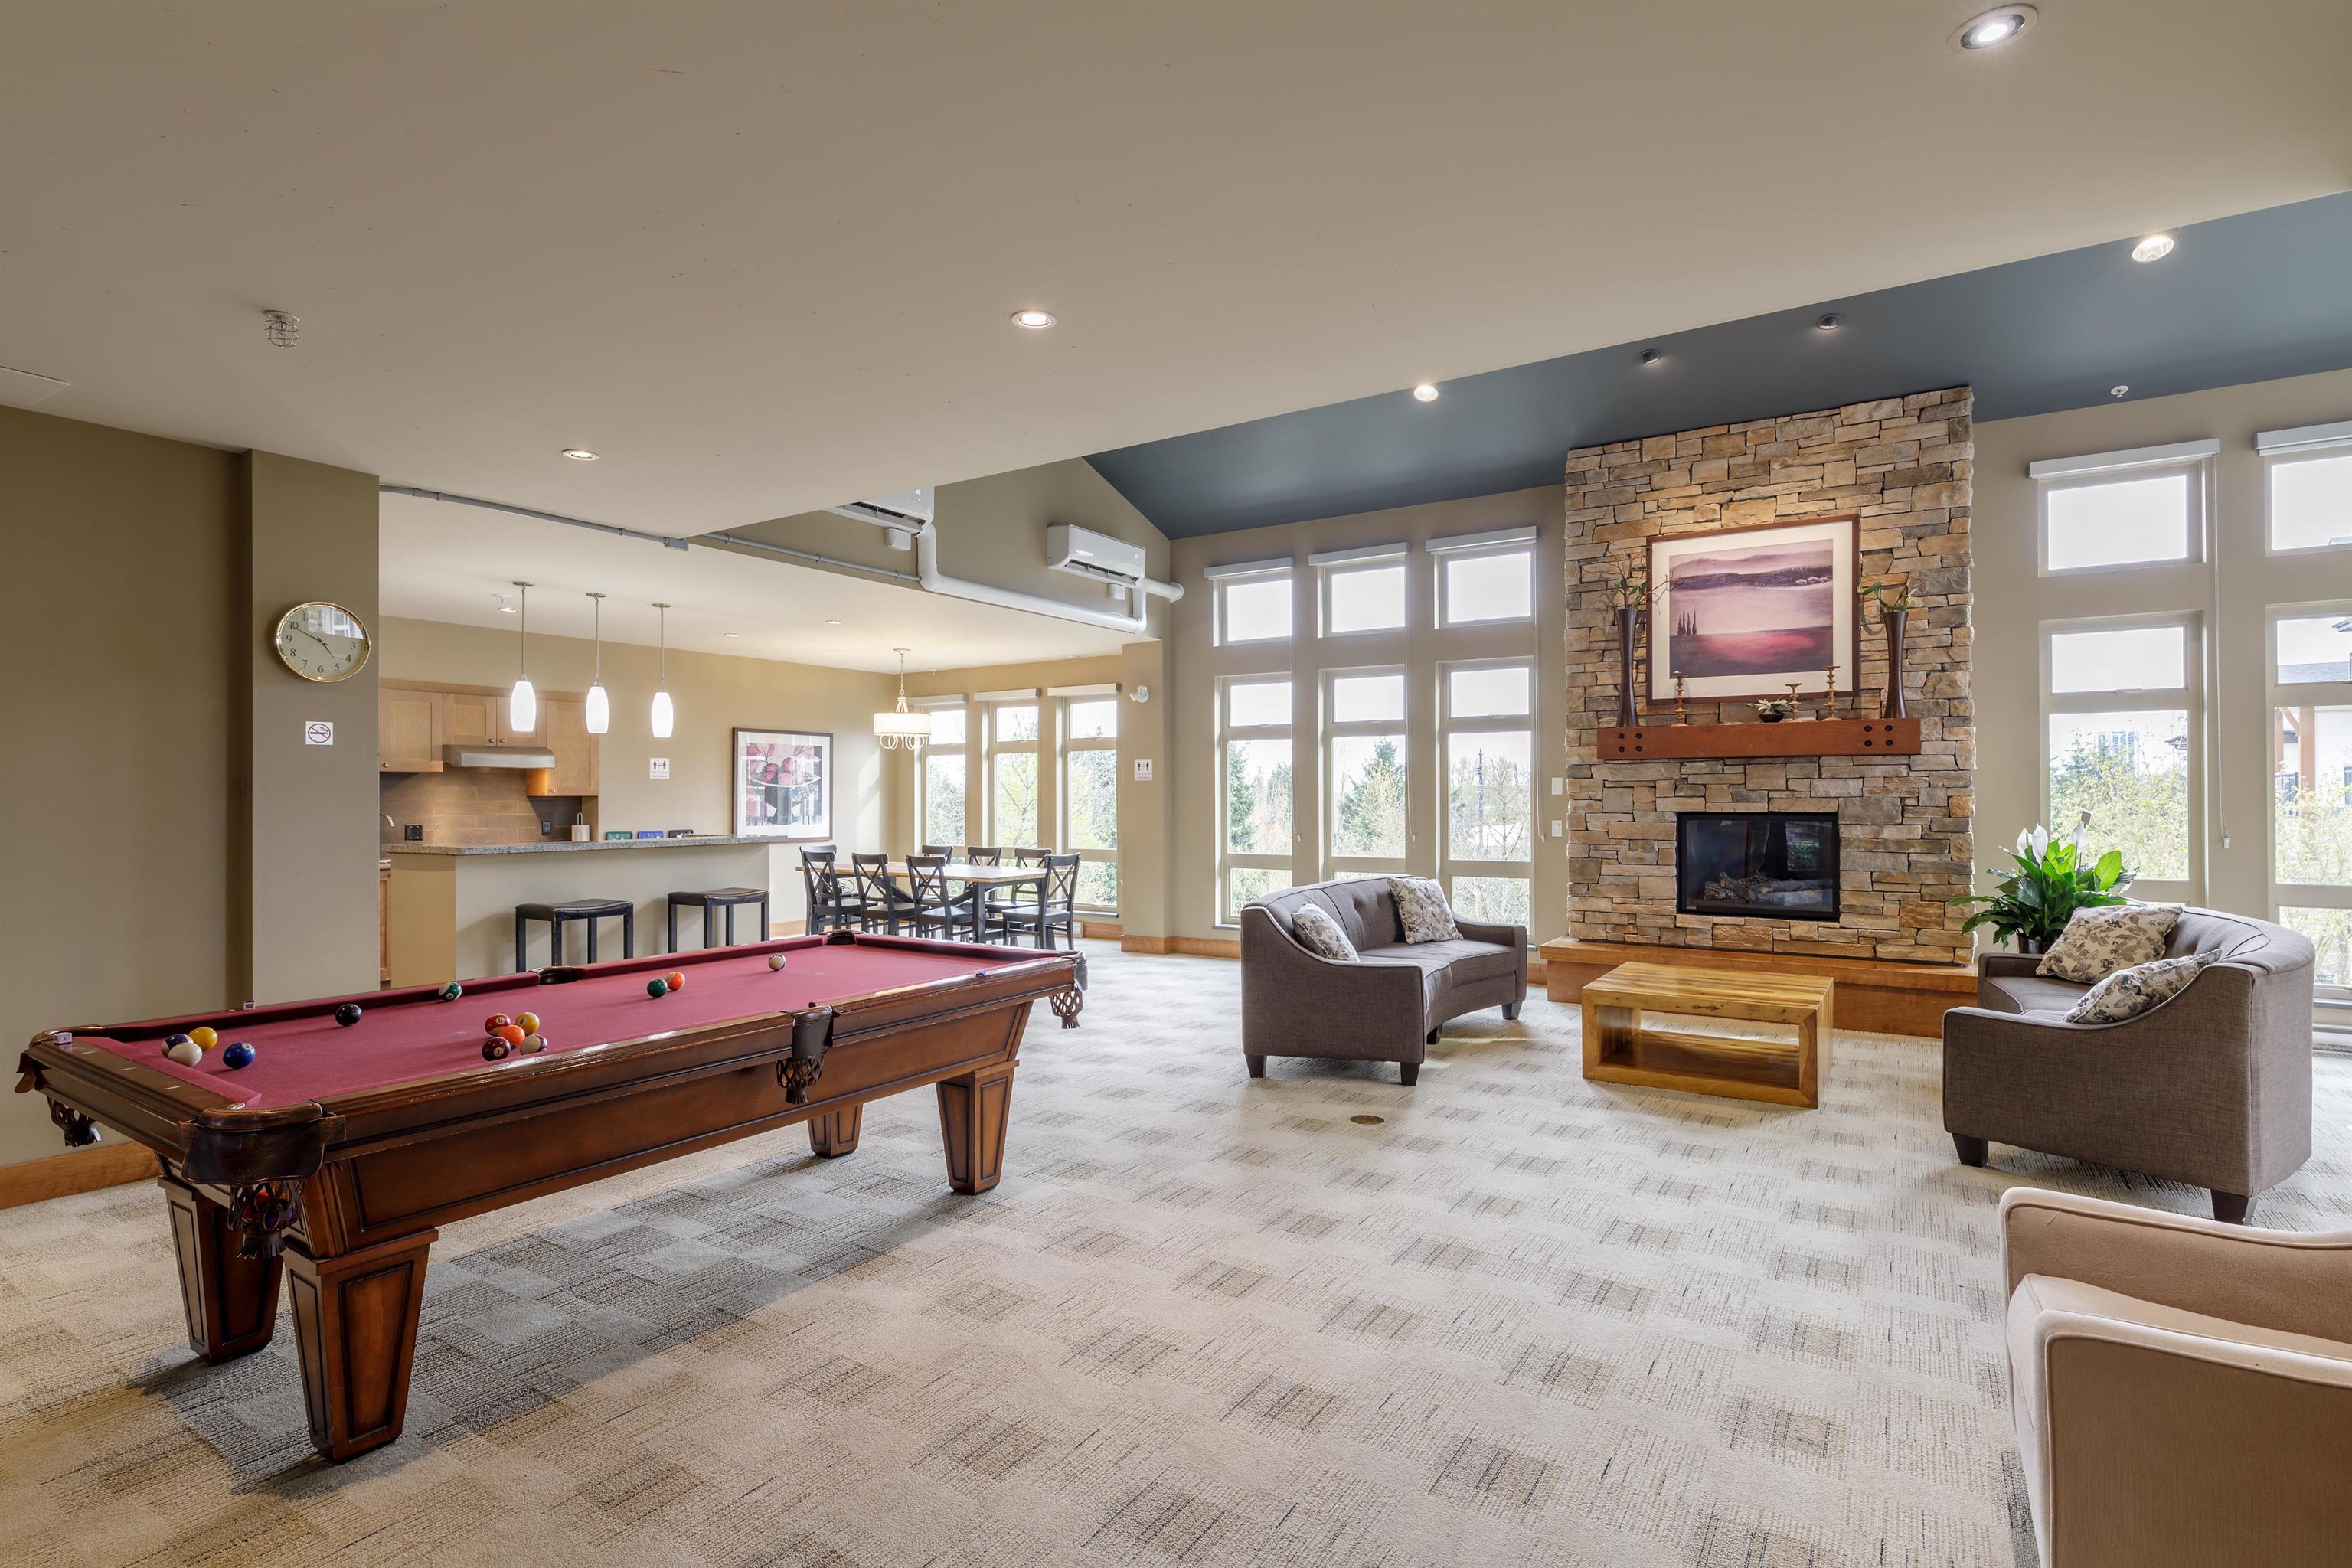 Use the amenity room for meetings or gatherings with a pool table, dining table and full kitchen.